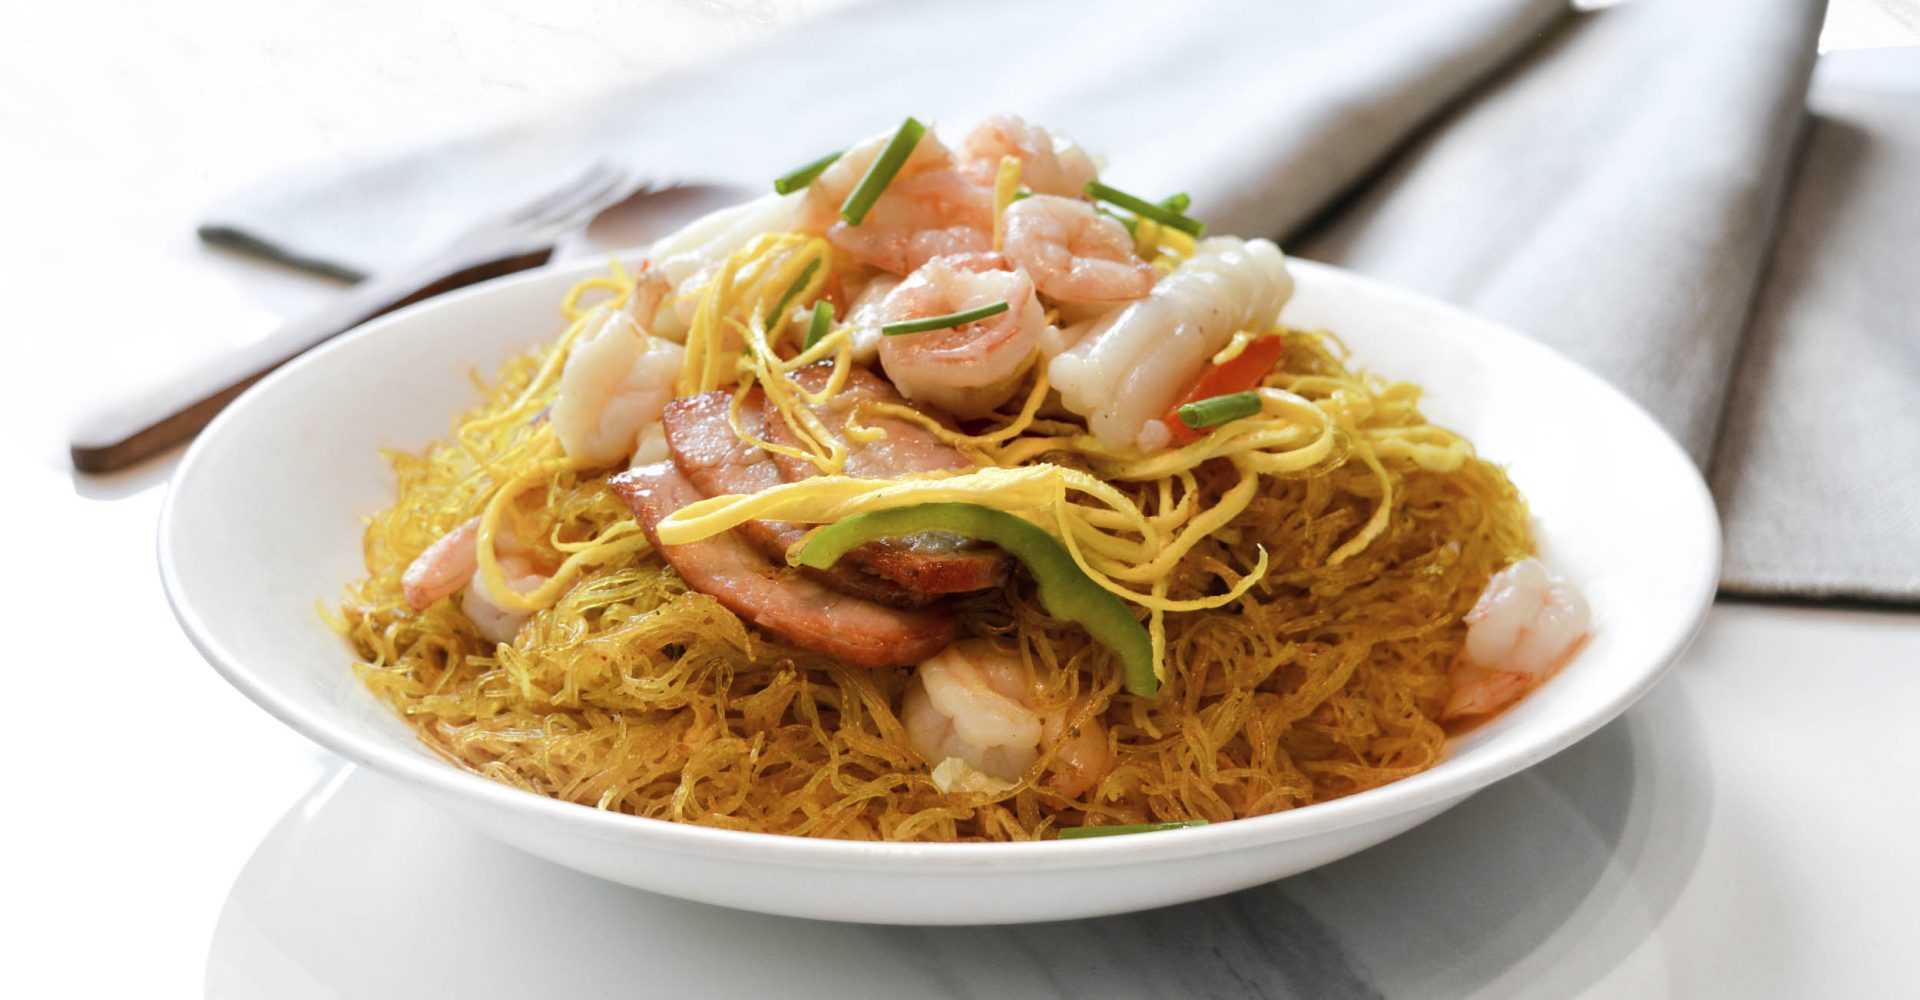 Xiu Noodles - Singapore style fried rice noodles with seafood